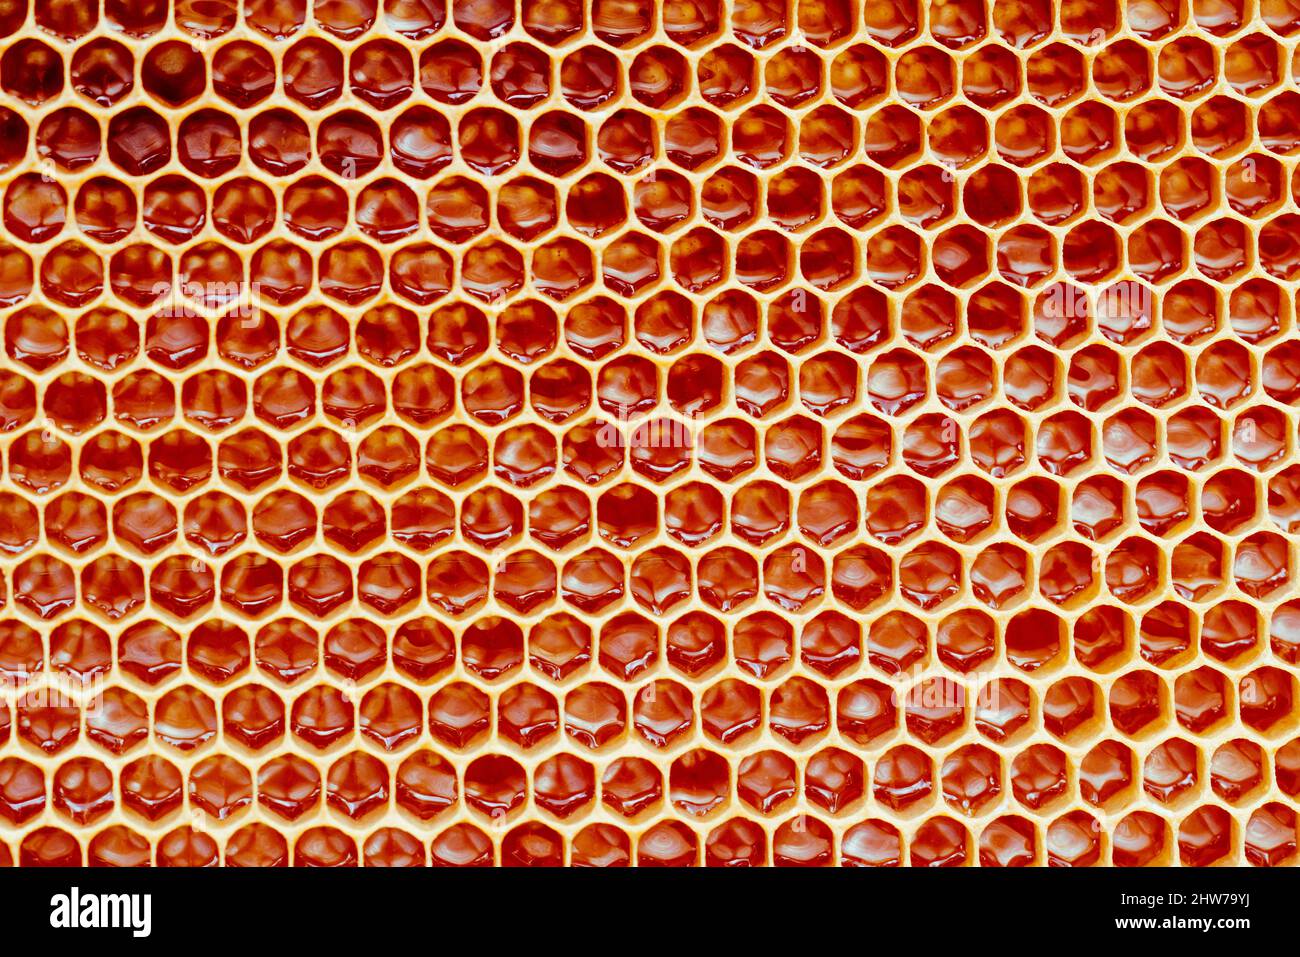 Background texture and pattern of a section of wax honeycomb from a bee hive filled with golden honey i Stock Photo